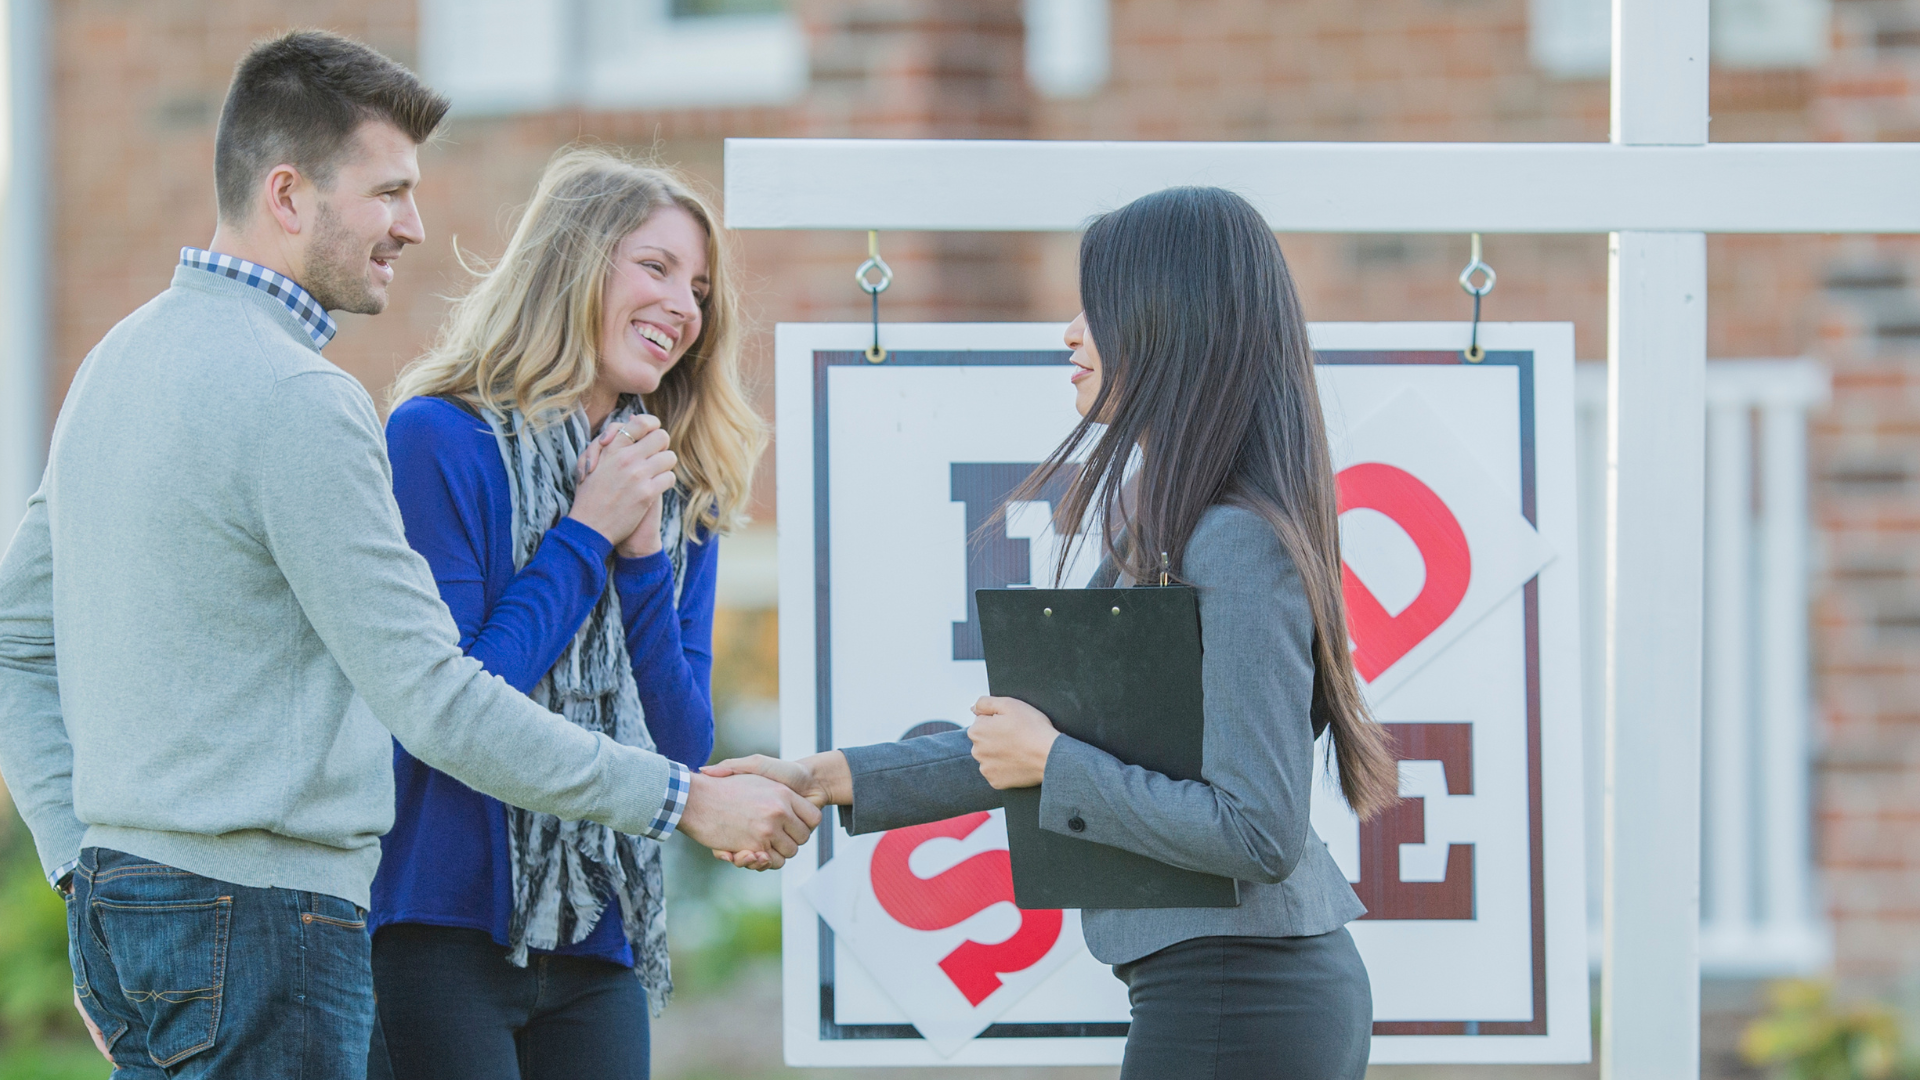 two friends buying a house together with a realtor in front of a "SOLD" sign How to Buy a House With a Friend?